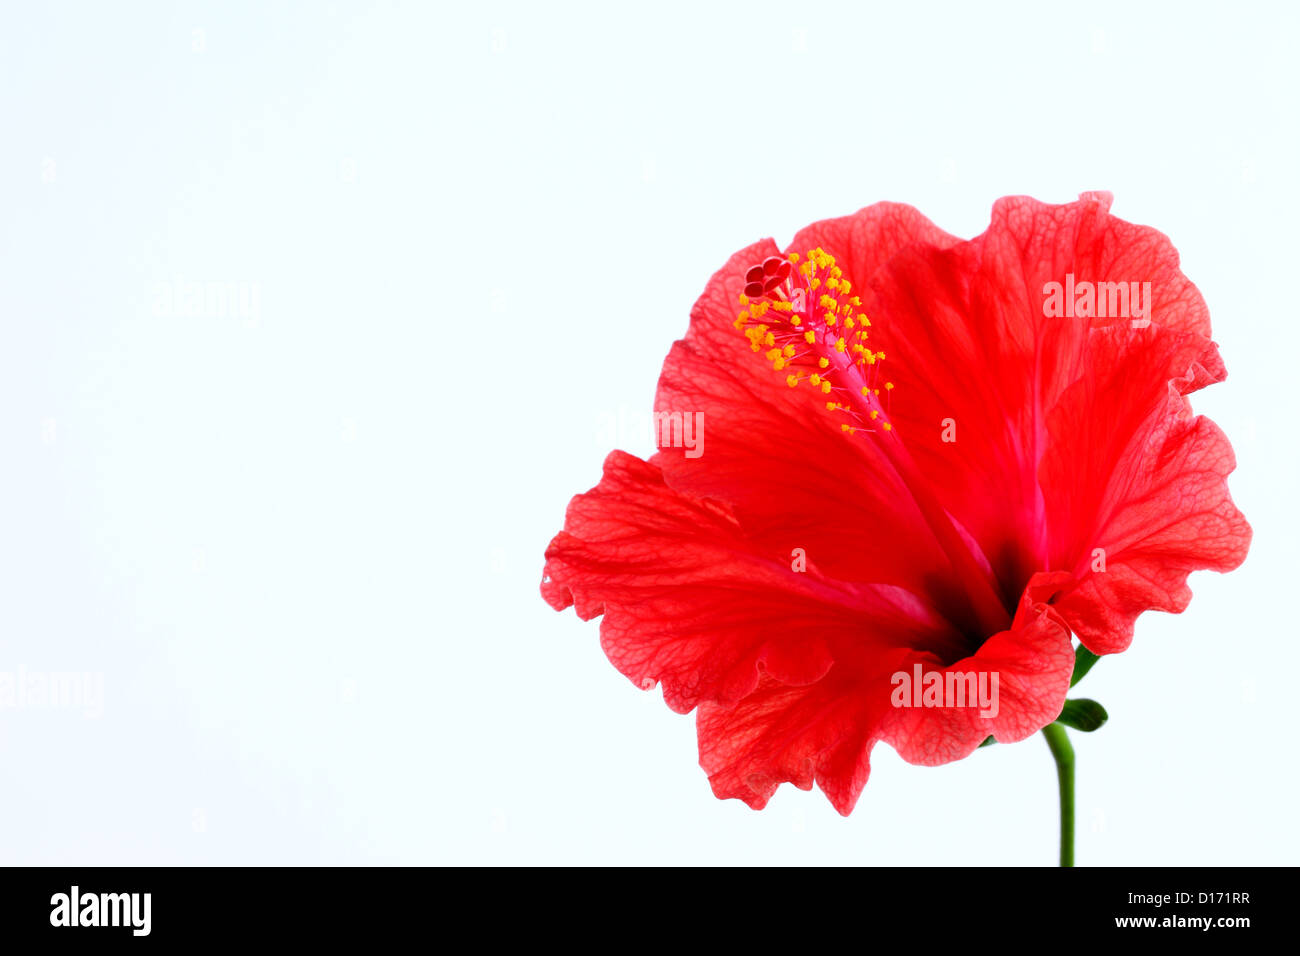 Close up of Hibiscus flower against white background Banque D'Images